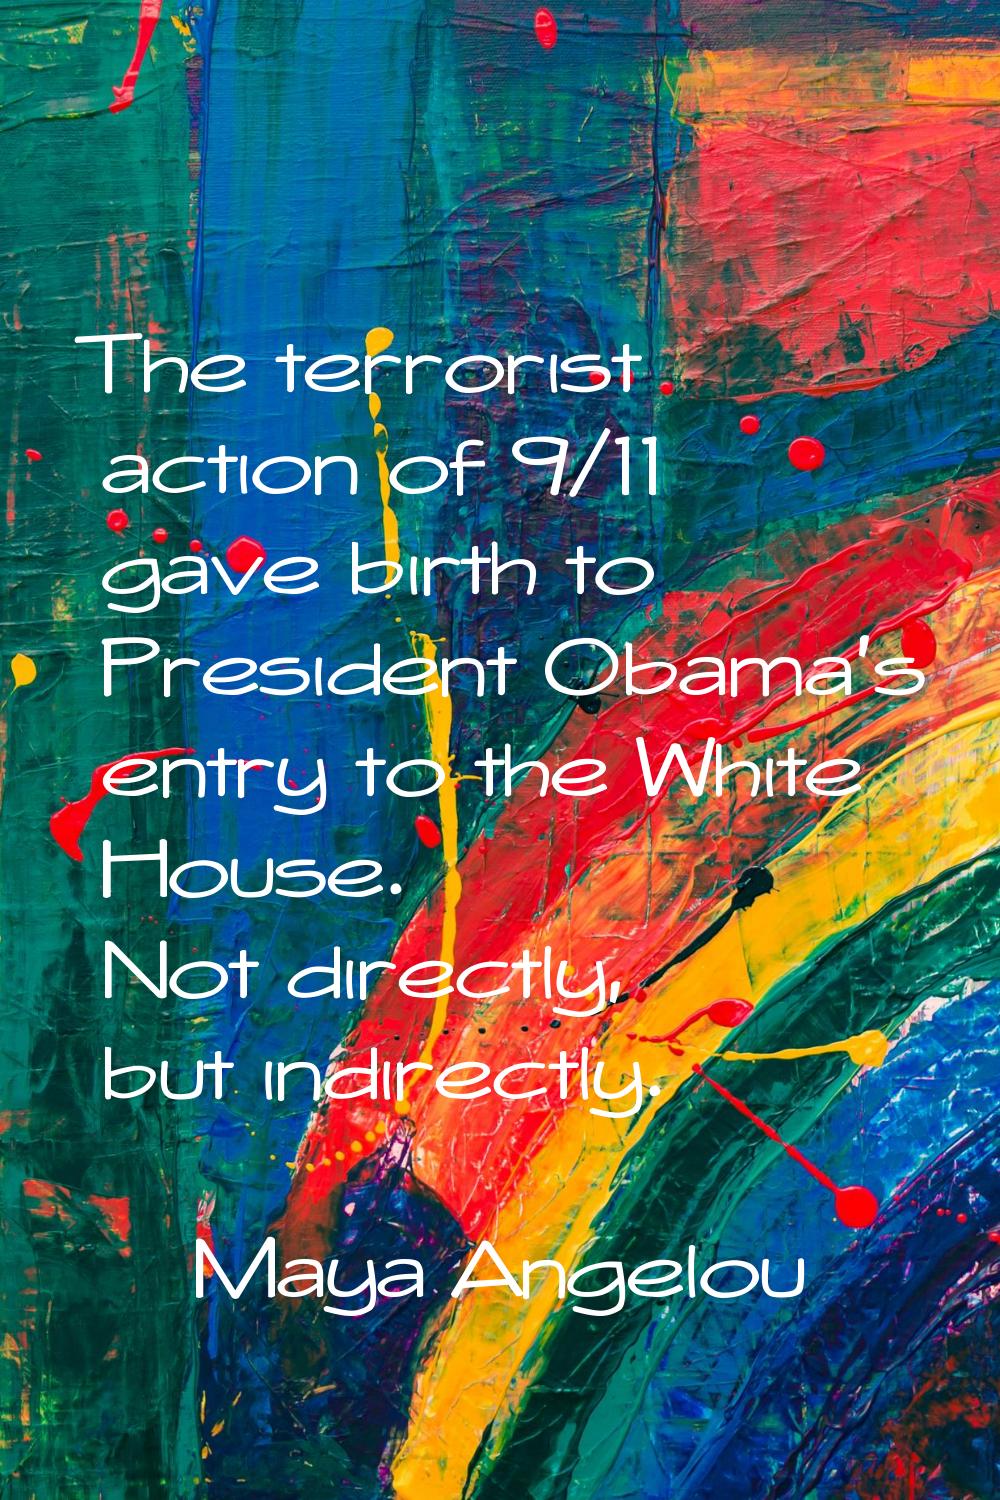 The terrorist action of 9/11 gave birth to President Obama's entry to the White House. Not directly